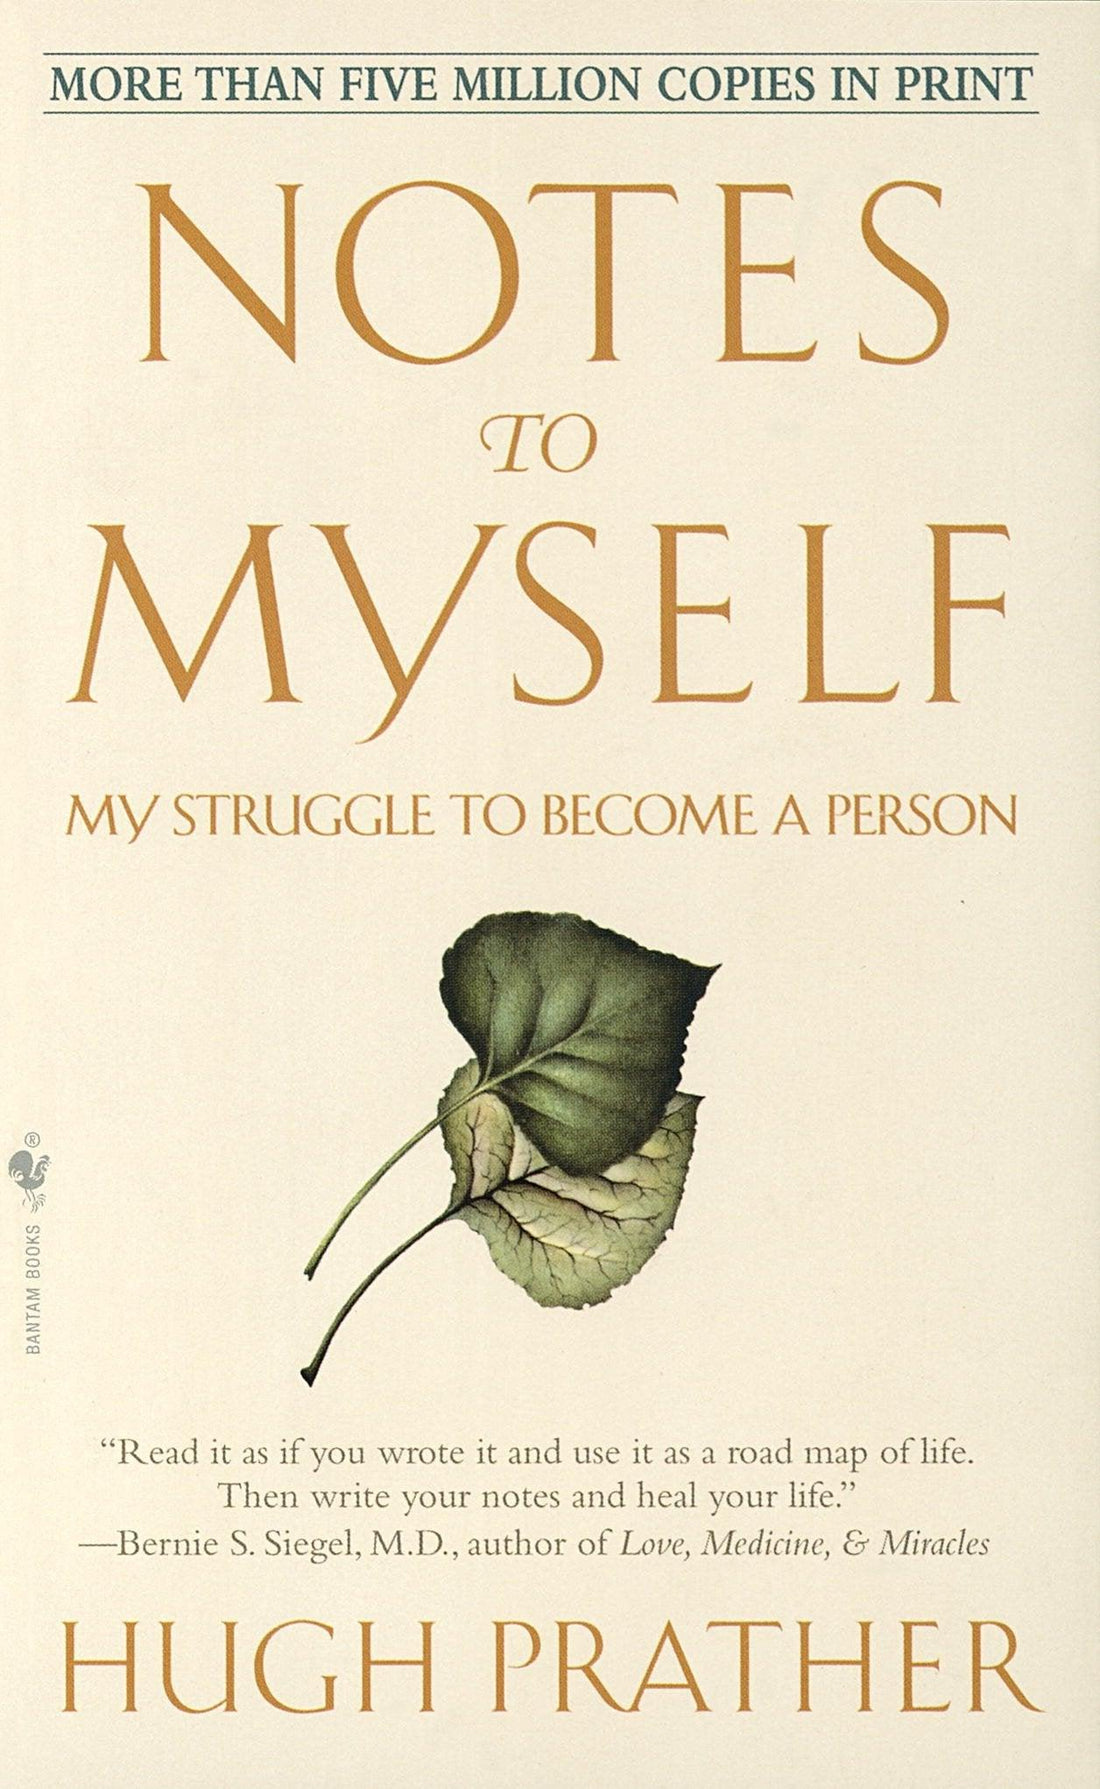 Why “Notes to Myself: My Struggle to Become a Person” is a perfect camping companion